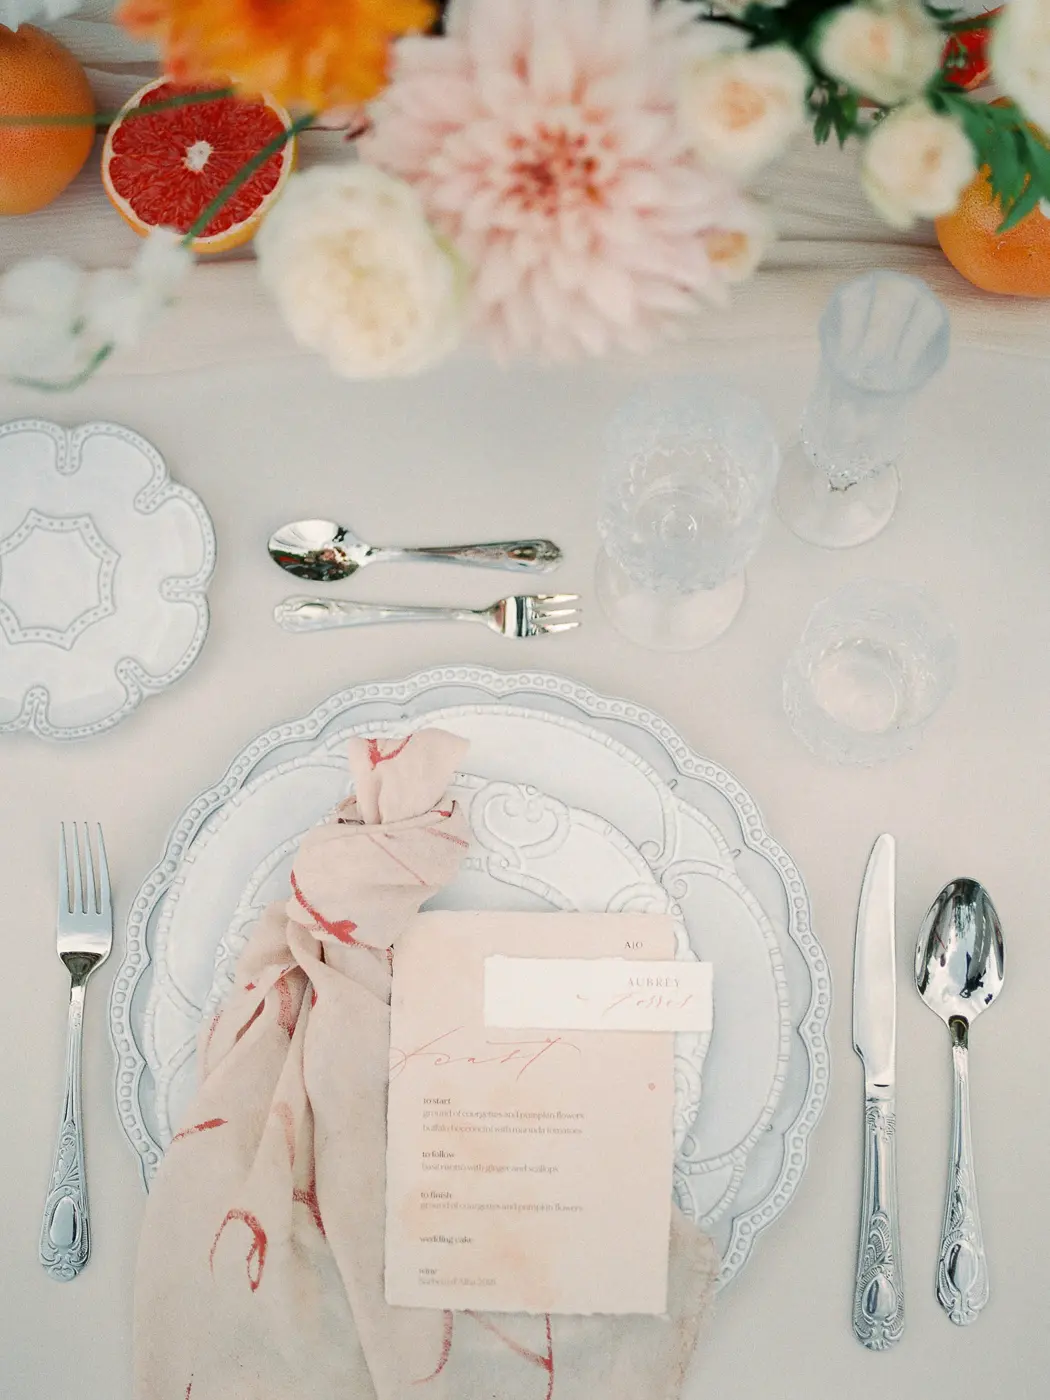 Timeless elegance of wedding table decoration with flowers, fruits and hand writing menu